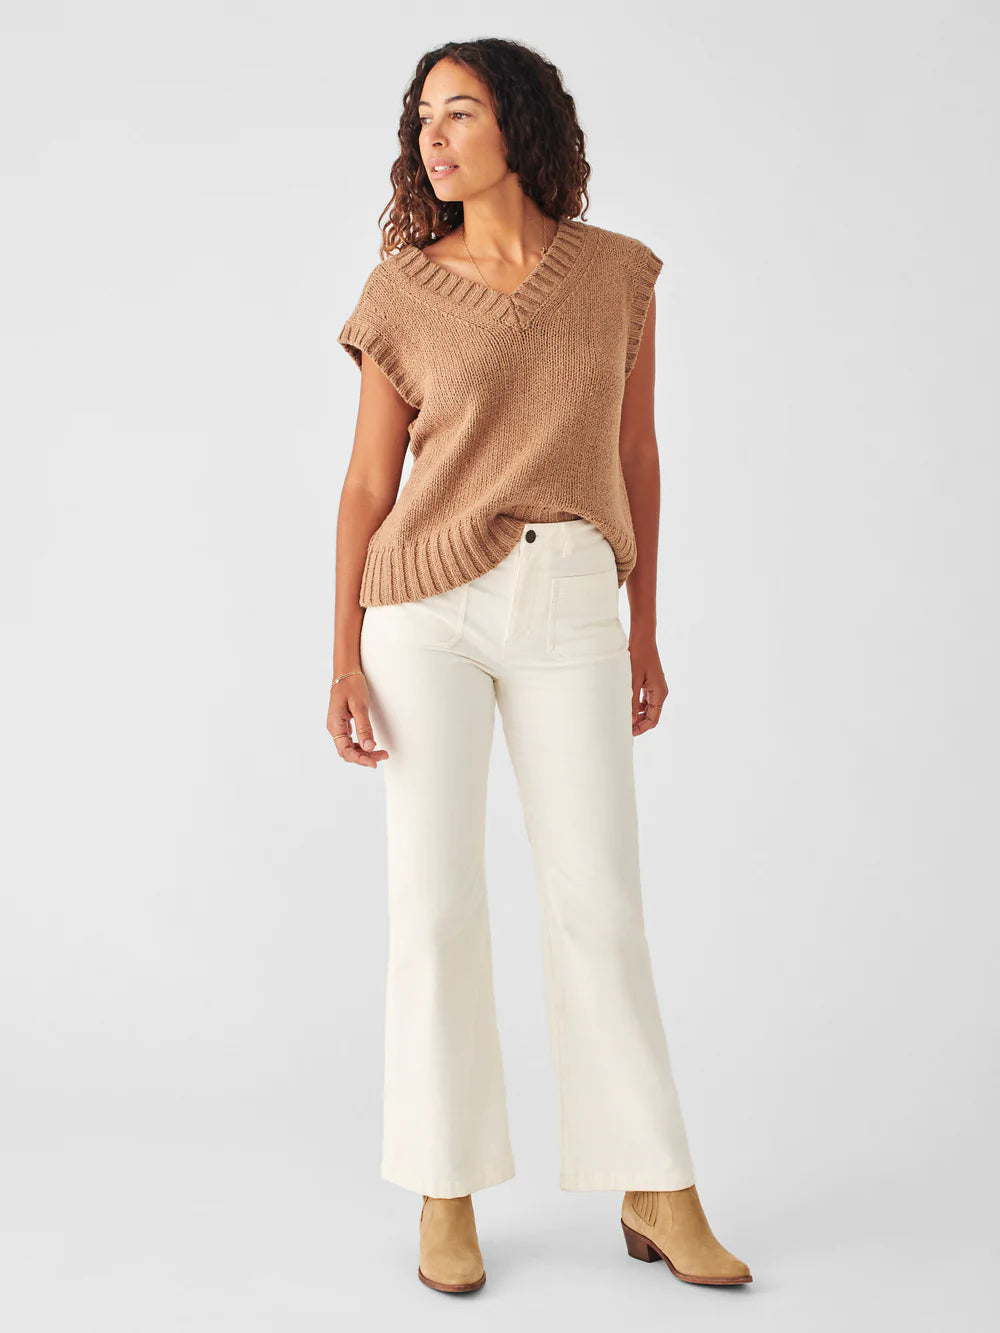 Stretch Cord Pocket Pant in Ivory